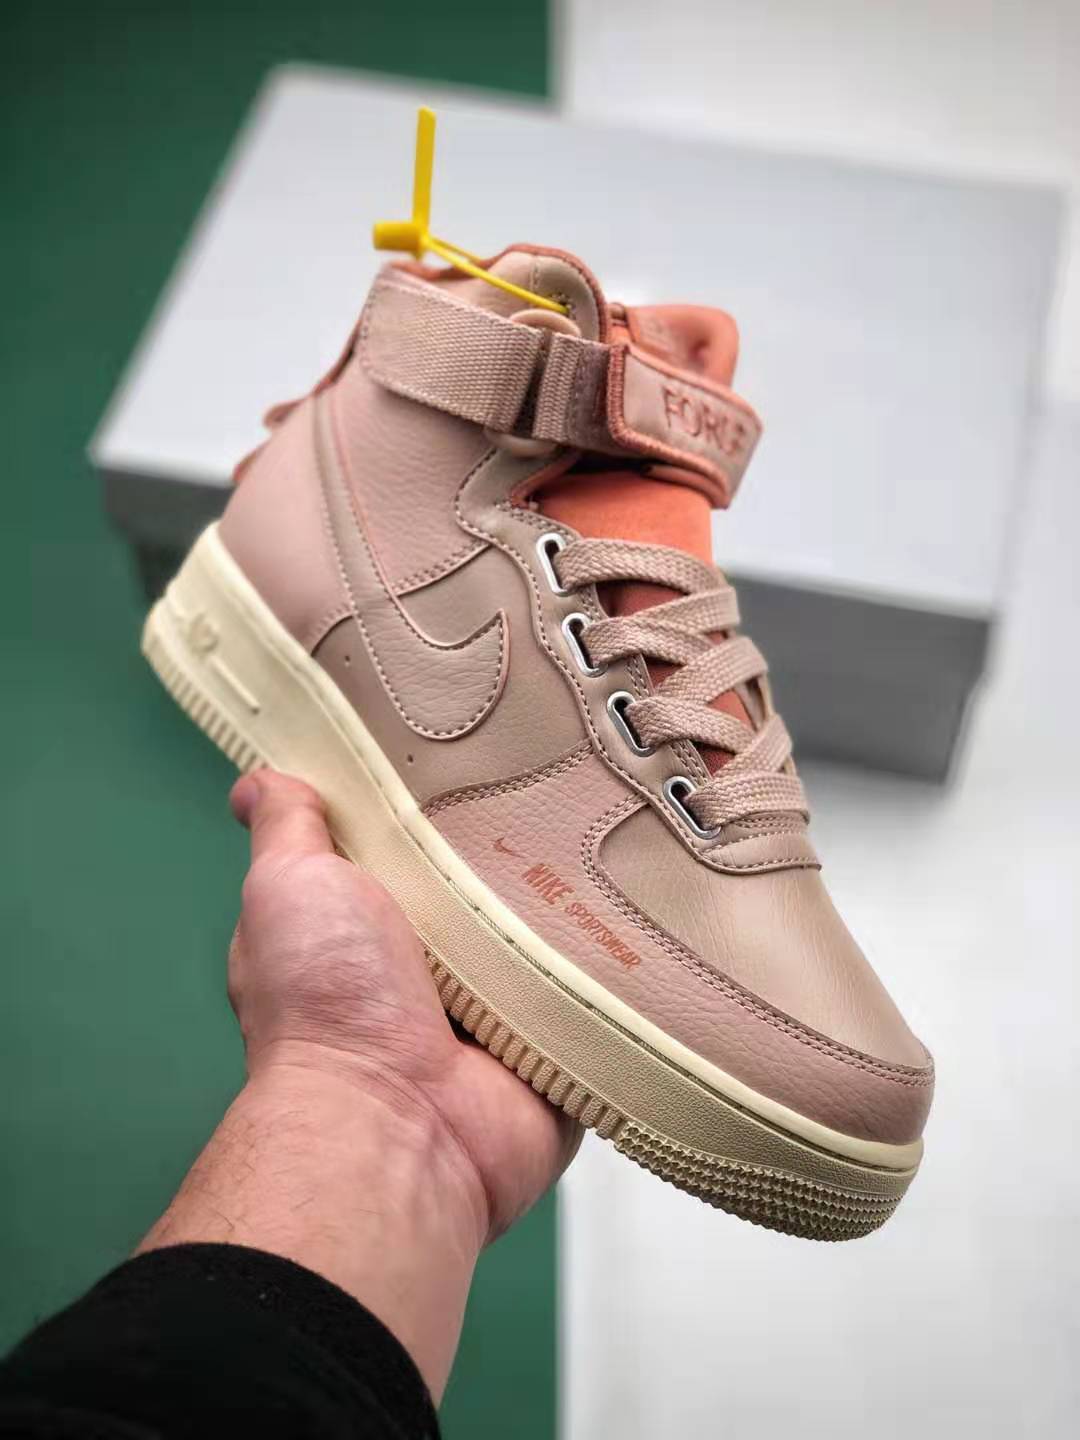 Nike Air Force 1 High Utility Particle Beige AJ7311-200 - Premium Sneakers for Style and Comfort